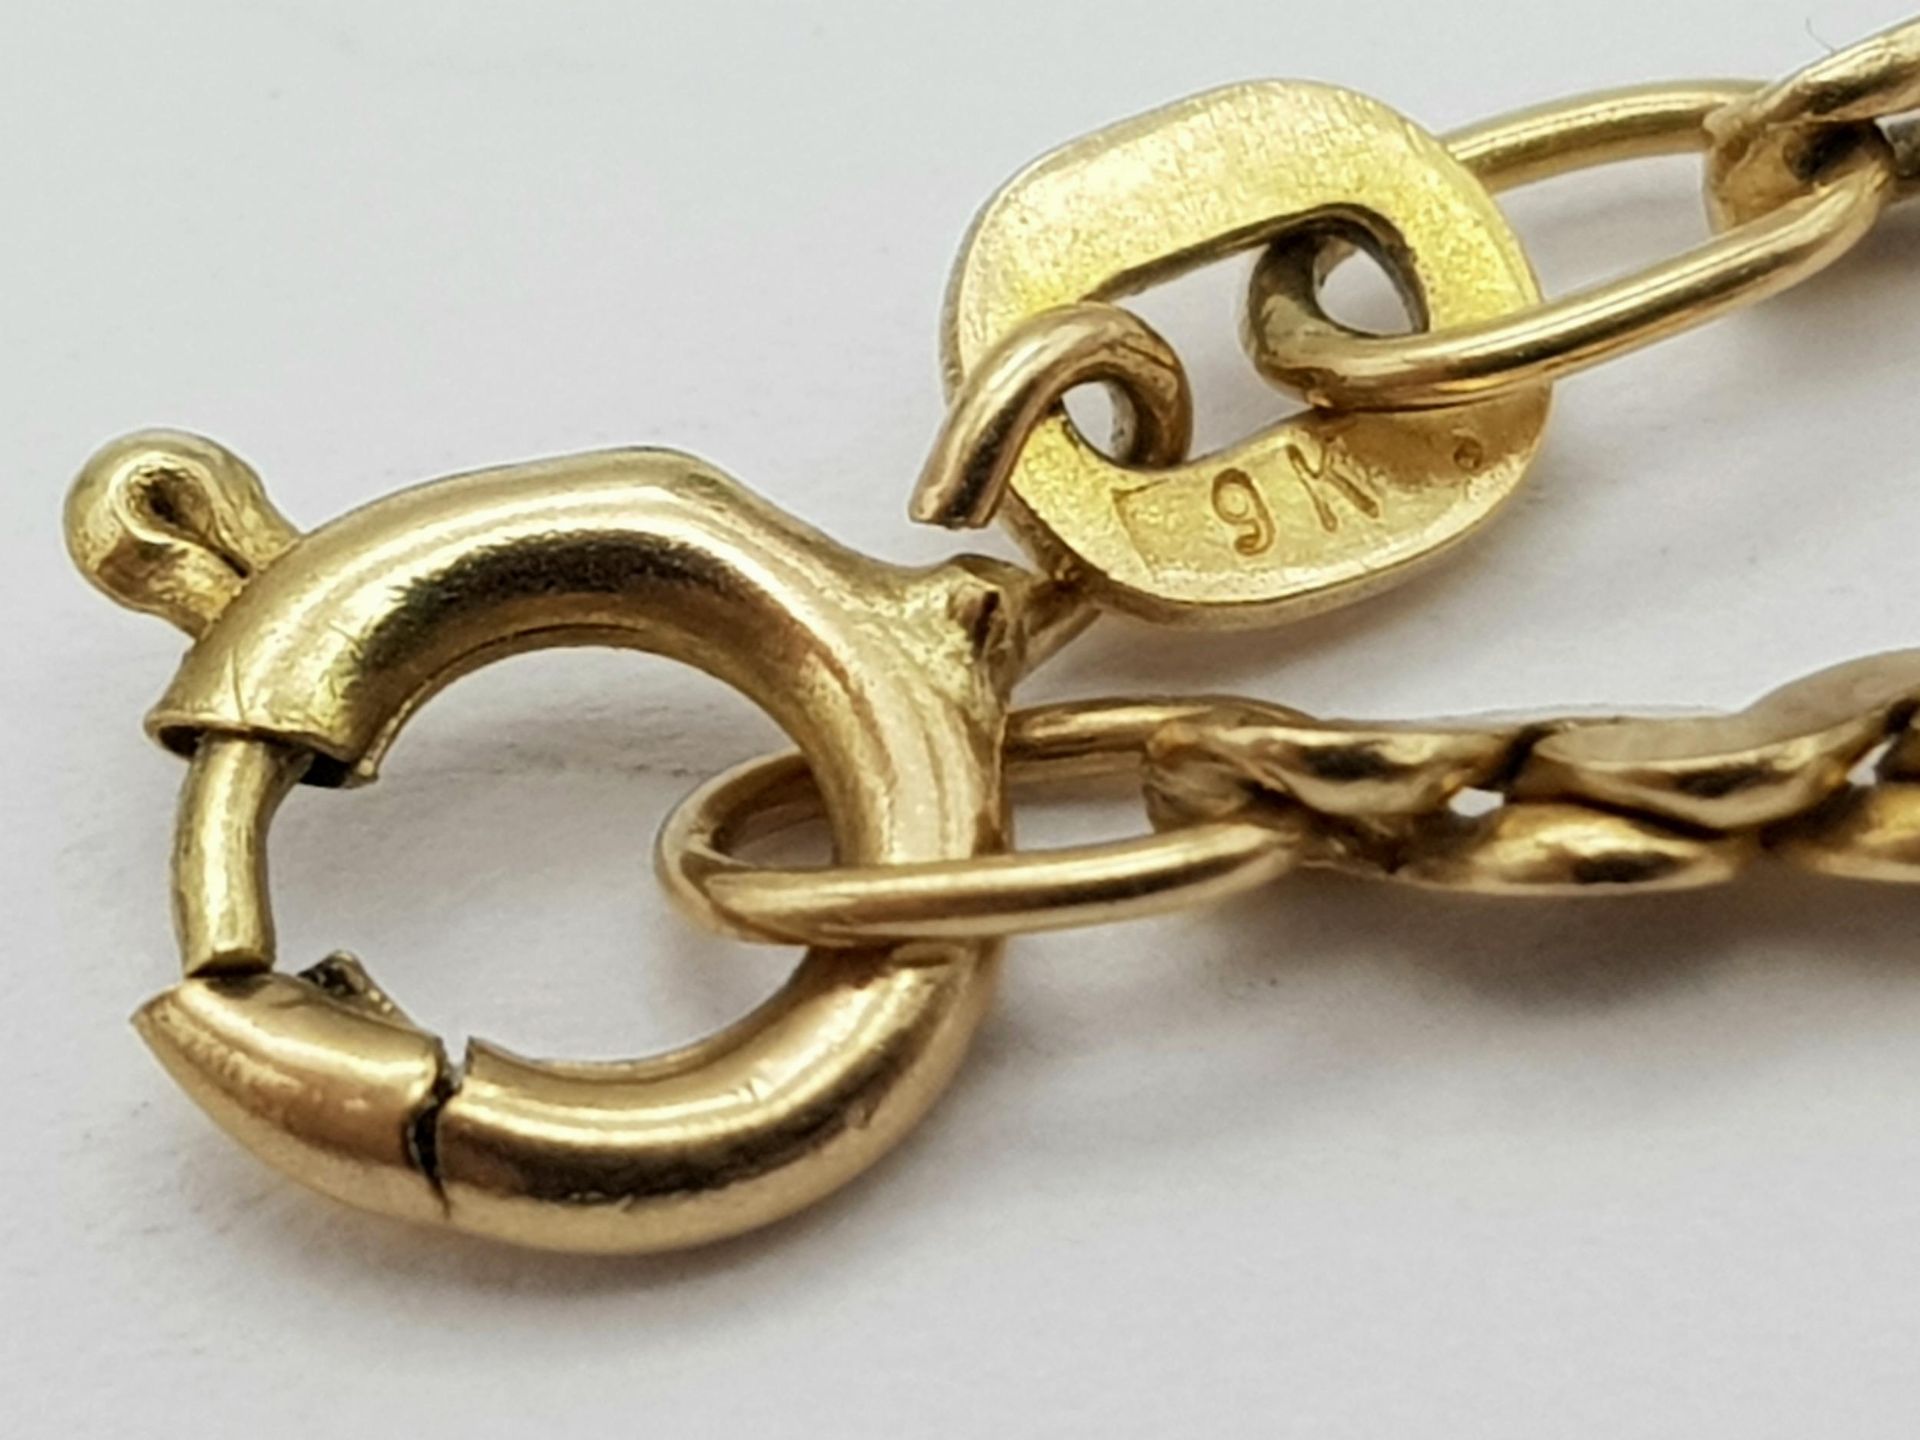 A 9K Yellow Gold Serpentine Link Bracelet. 17cm. 3.9g weight. - Image 3 of 5